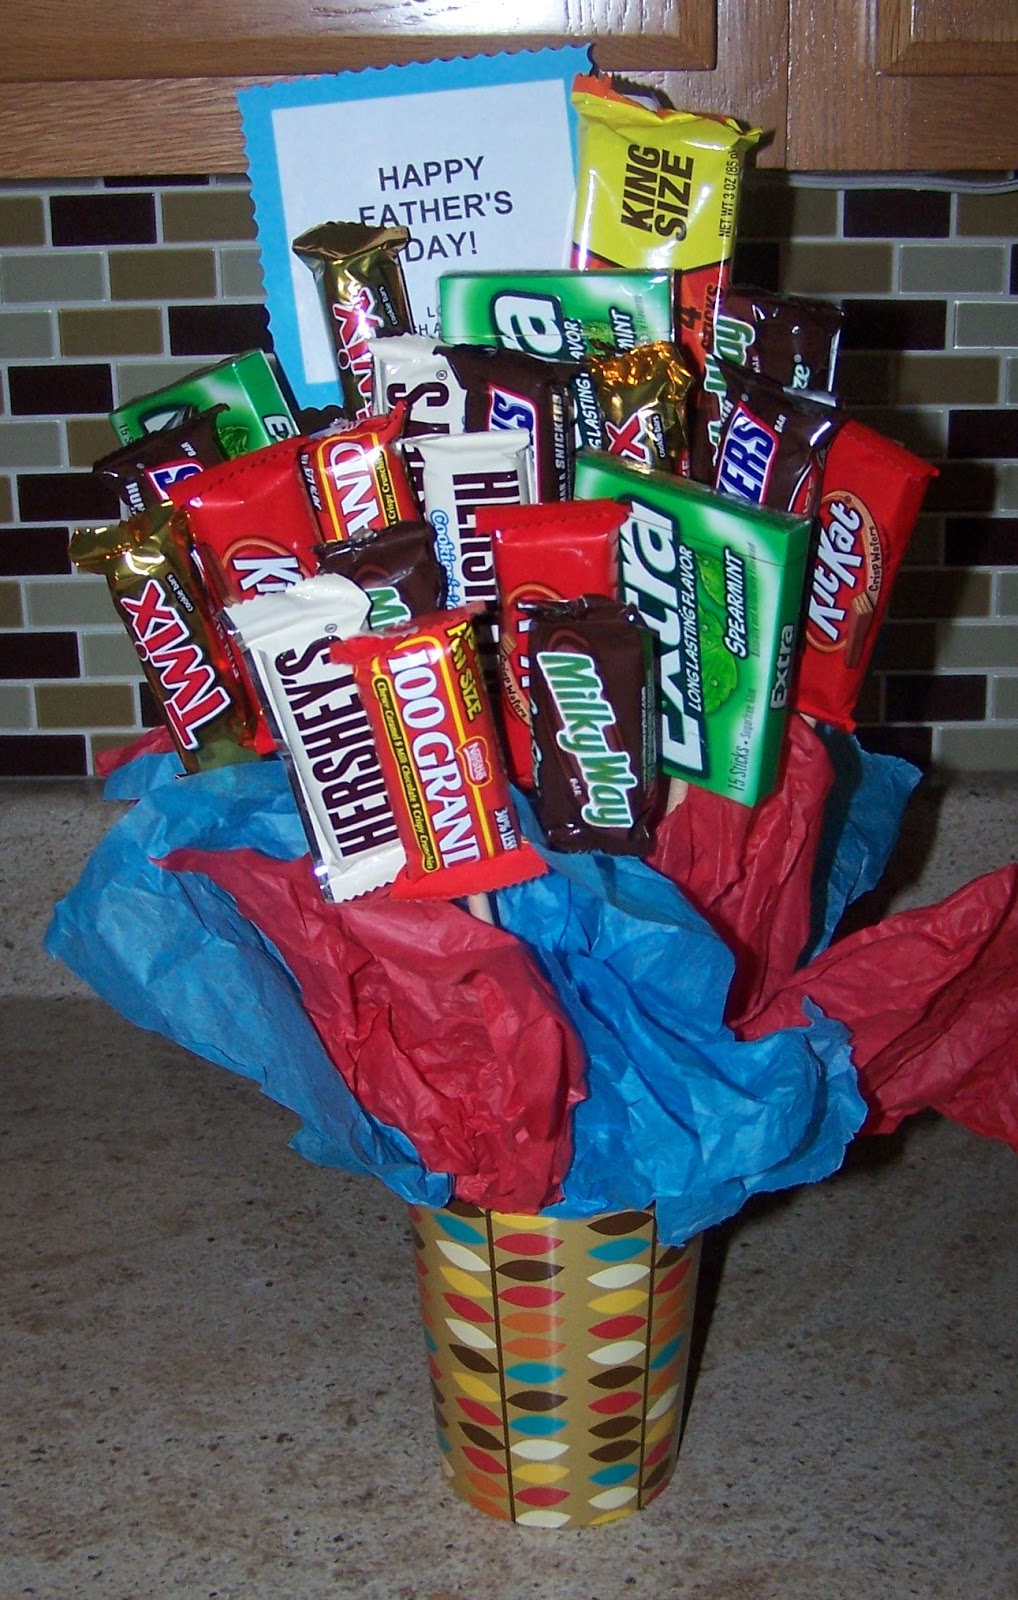 The Beautiful Budget: Candy Bouquets